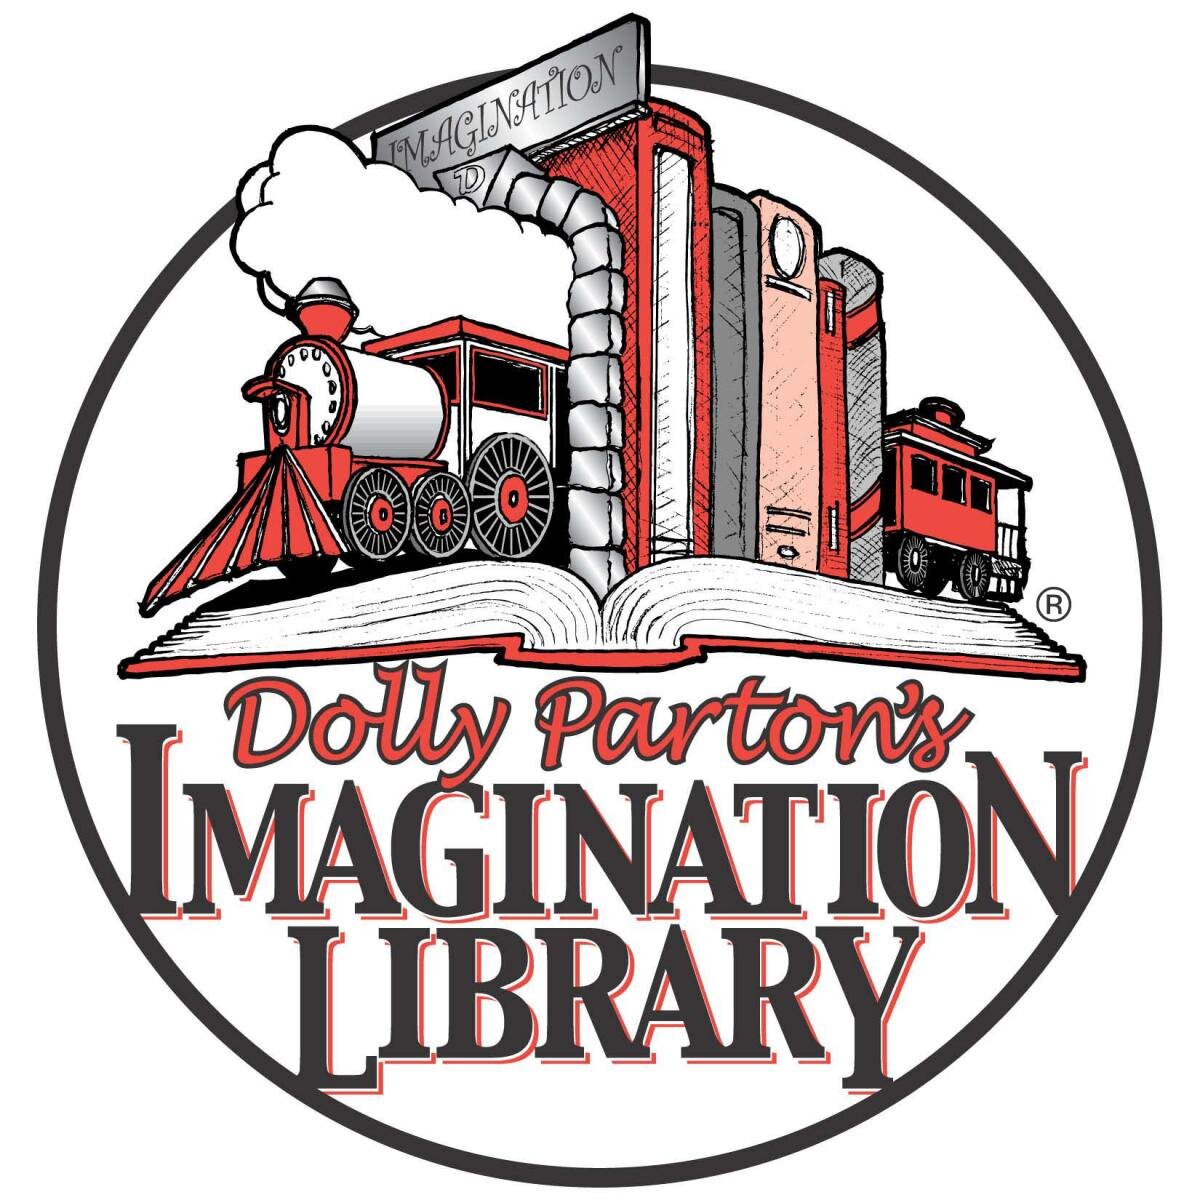 Sullivan Co. Imagination Library is a free literacy program open to children from birth to 5 yrs who are residents of Sullivan County. http://t.co/baFs6Cvaze